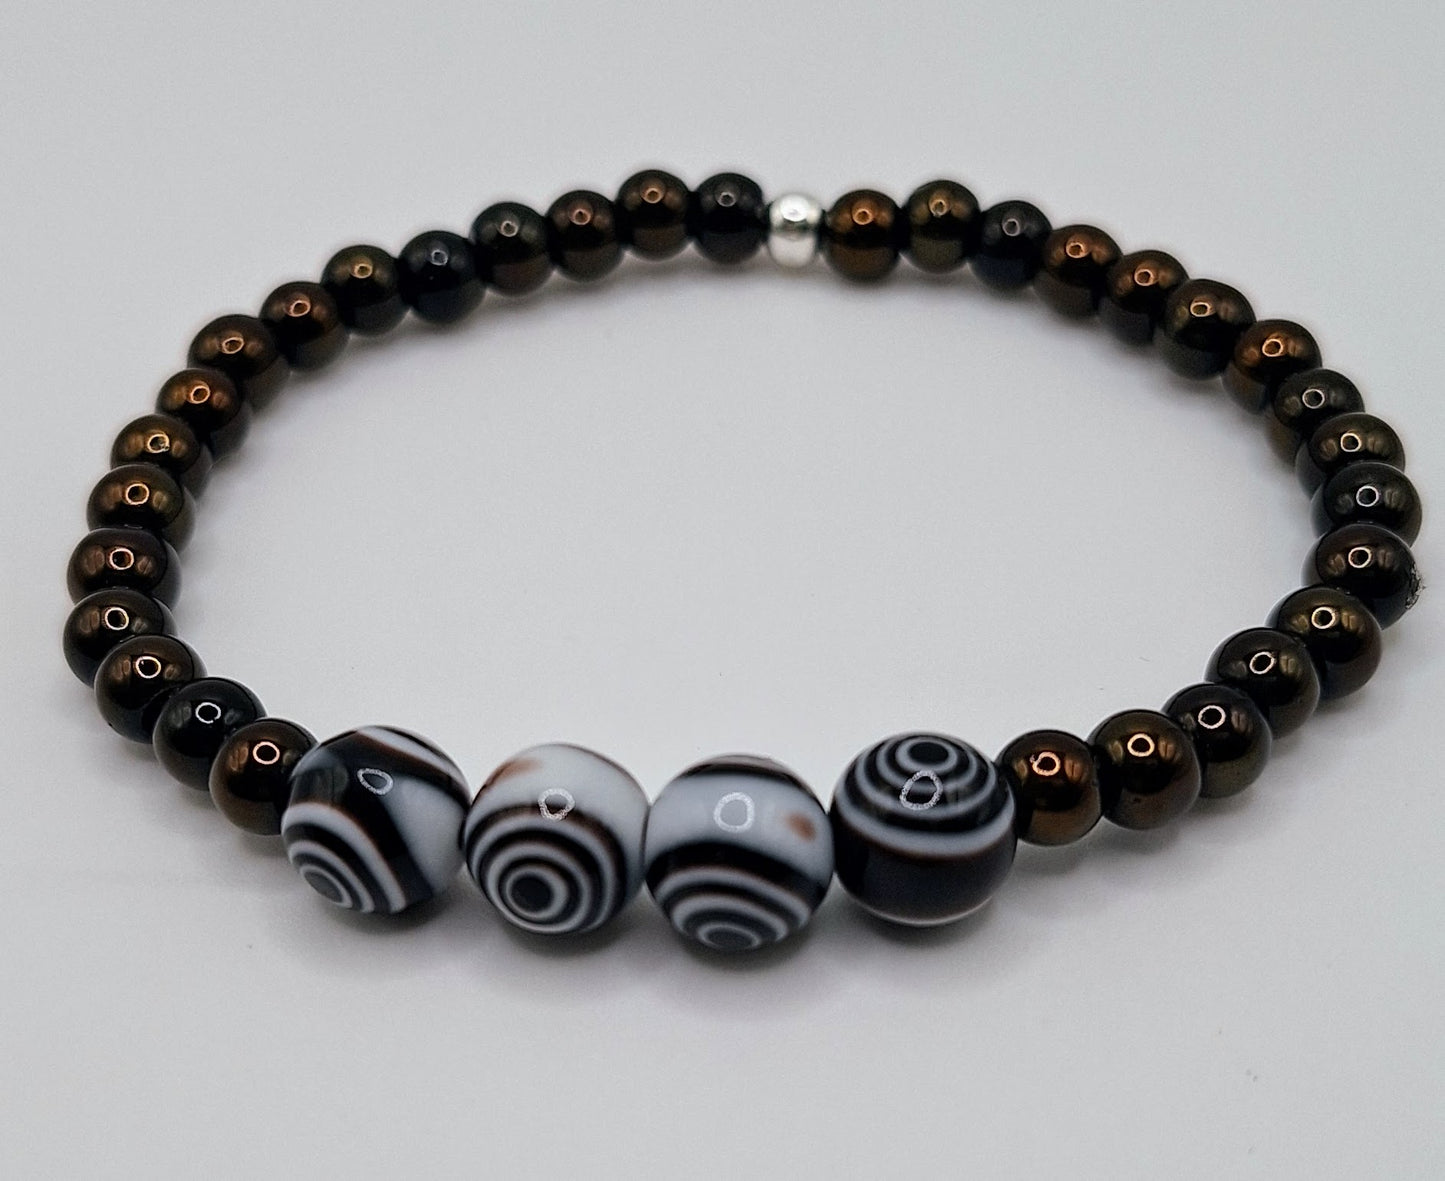 Introducing our stylish and versatile Men's Black Obsidian and  Black White Eye Glass Lamp work Beaded Stretchy Bracelet!